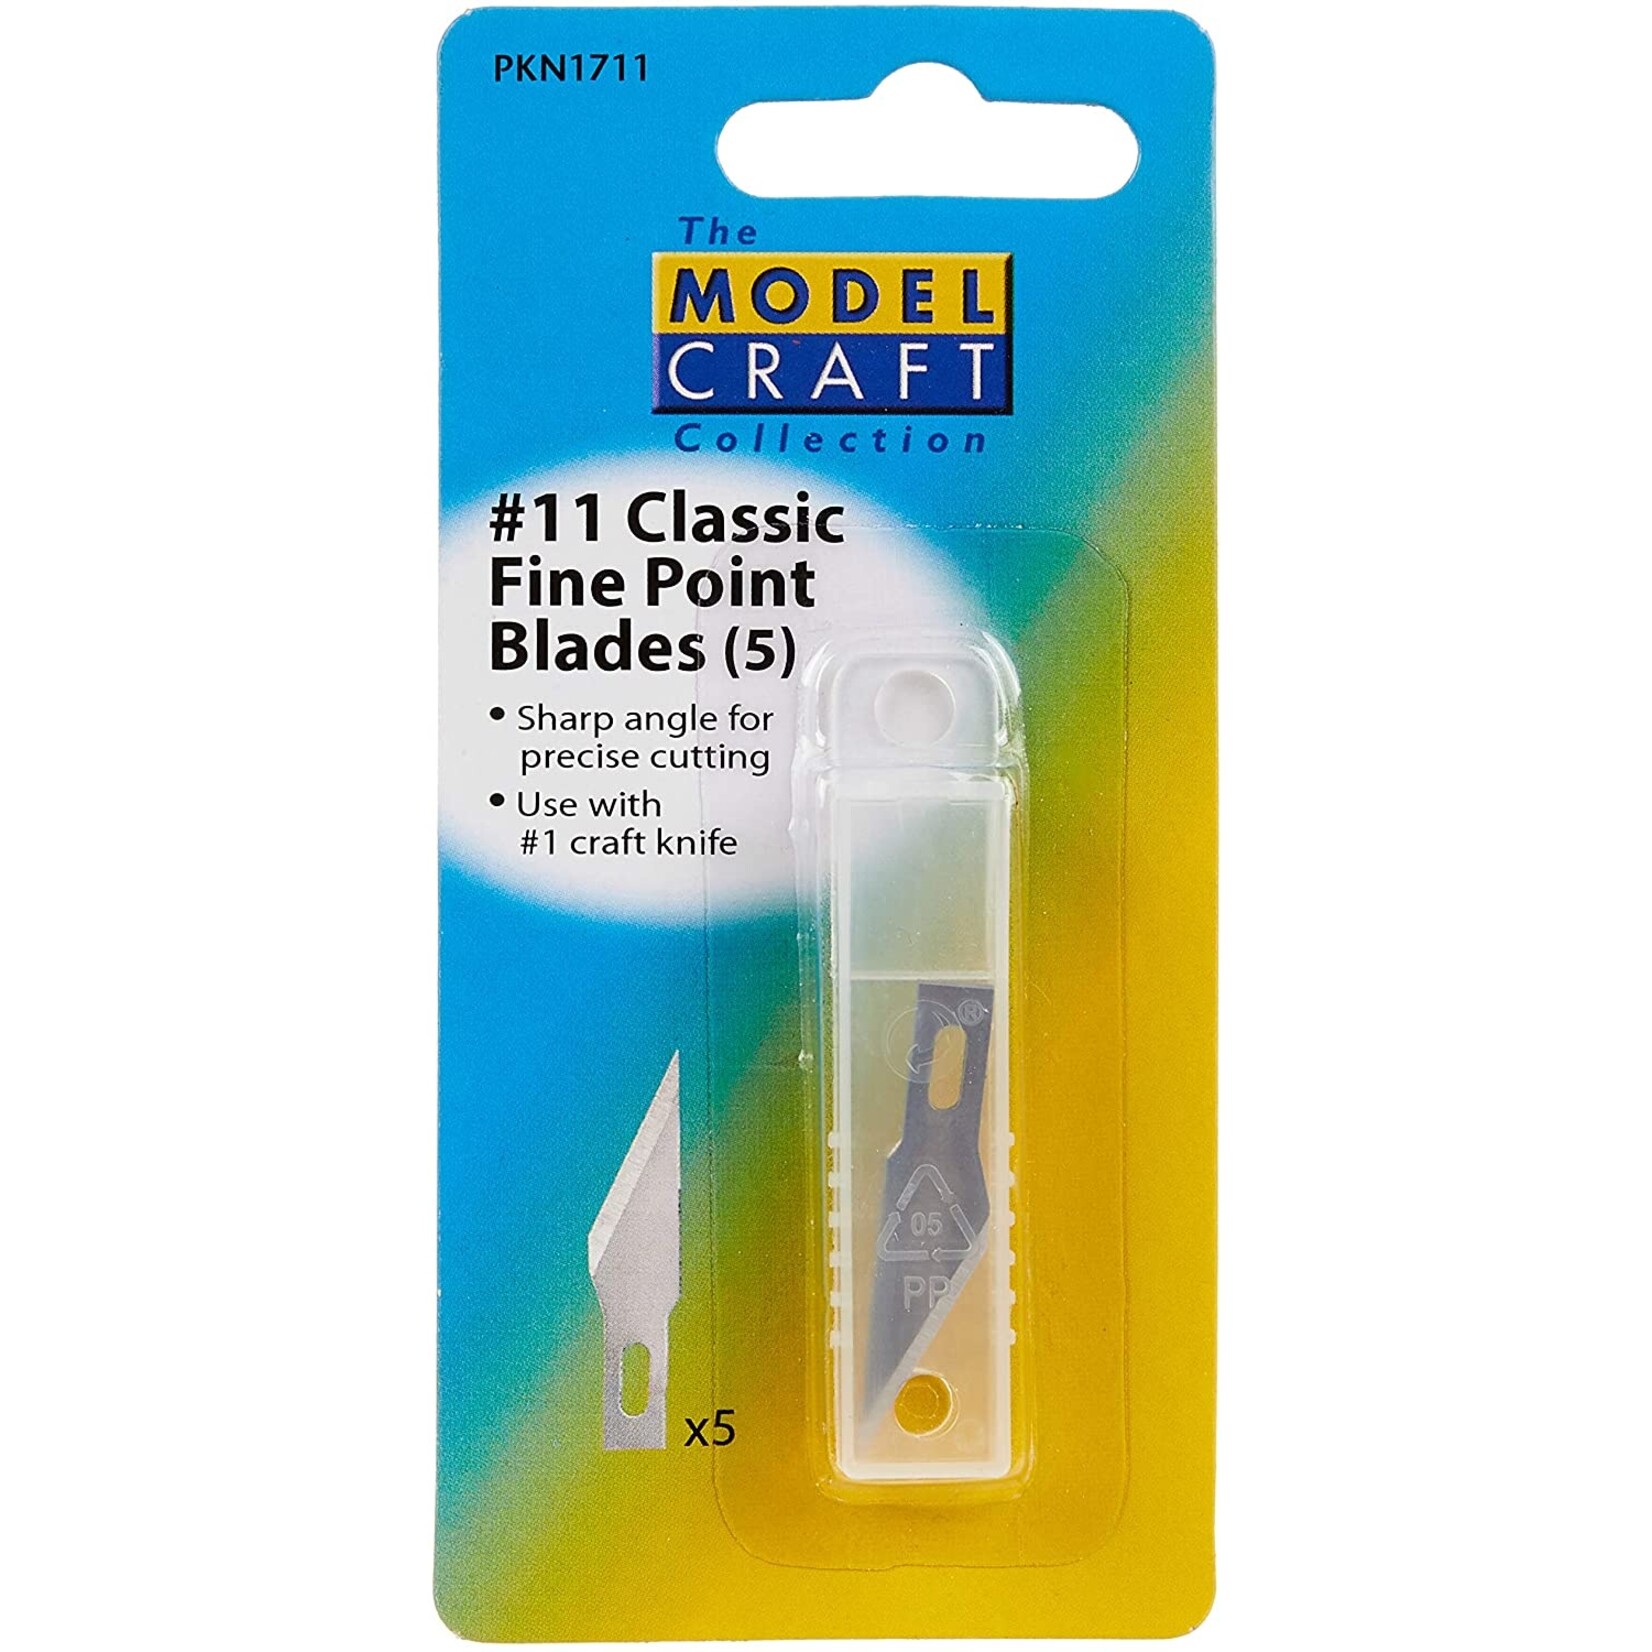 Model Craft Classic Craft Knife #11 Blades Refill Pack (5)